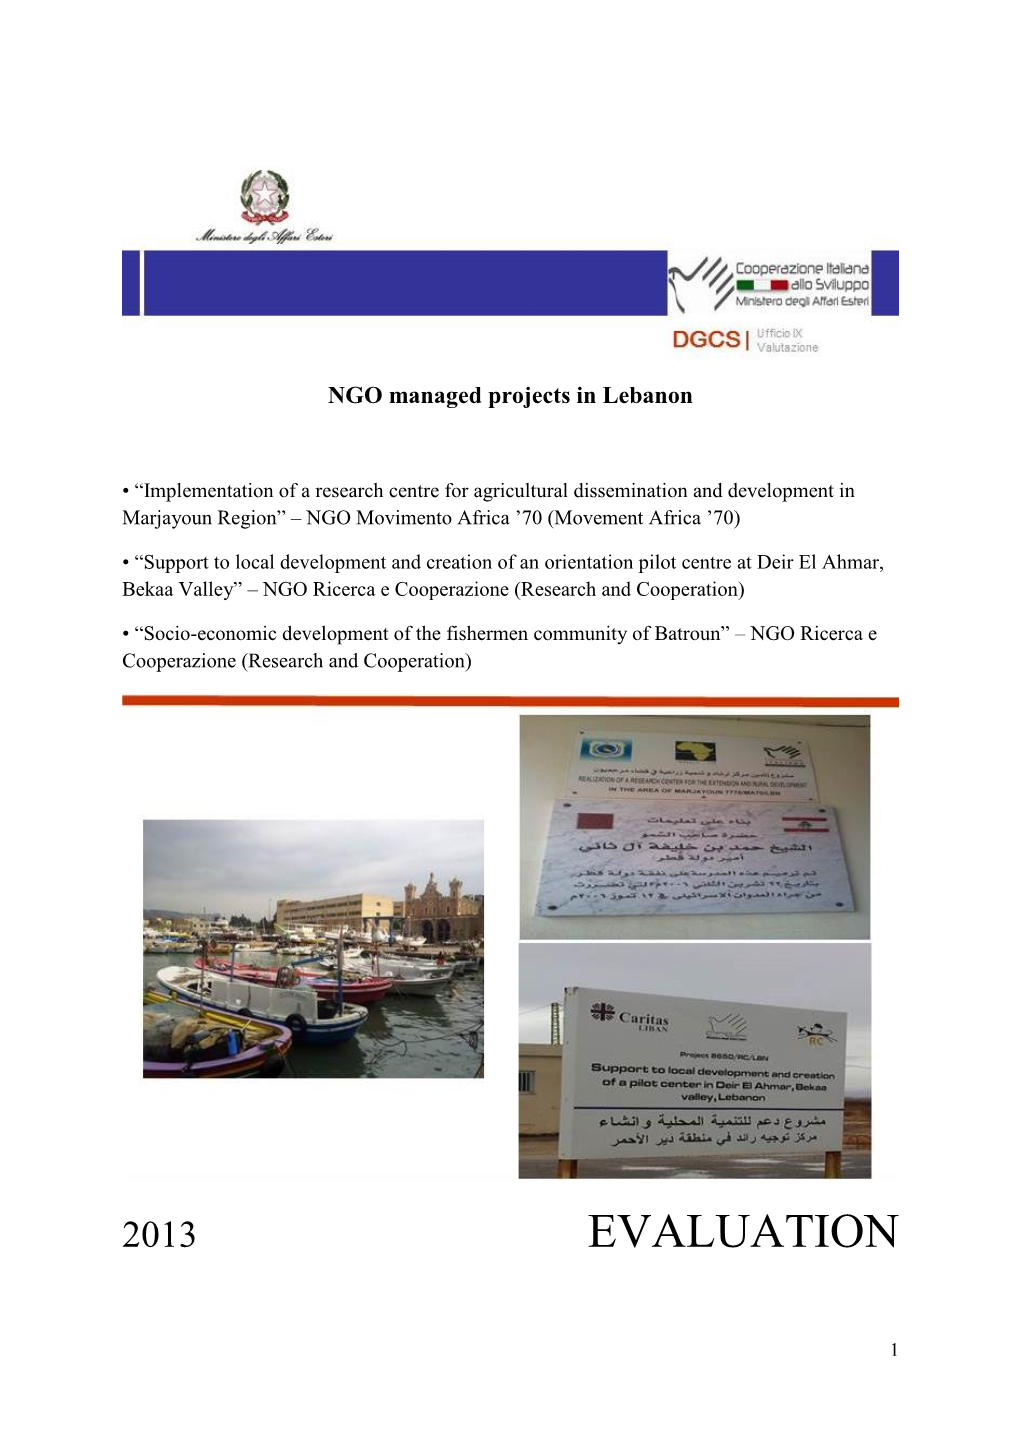 Evaluation Ex Post of NGO Managed Projects in Lebanon